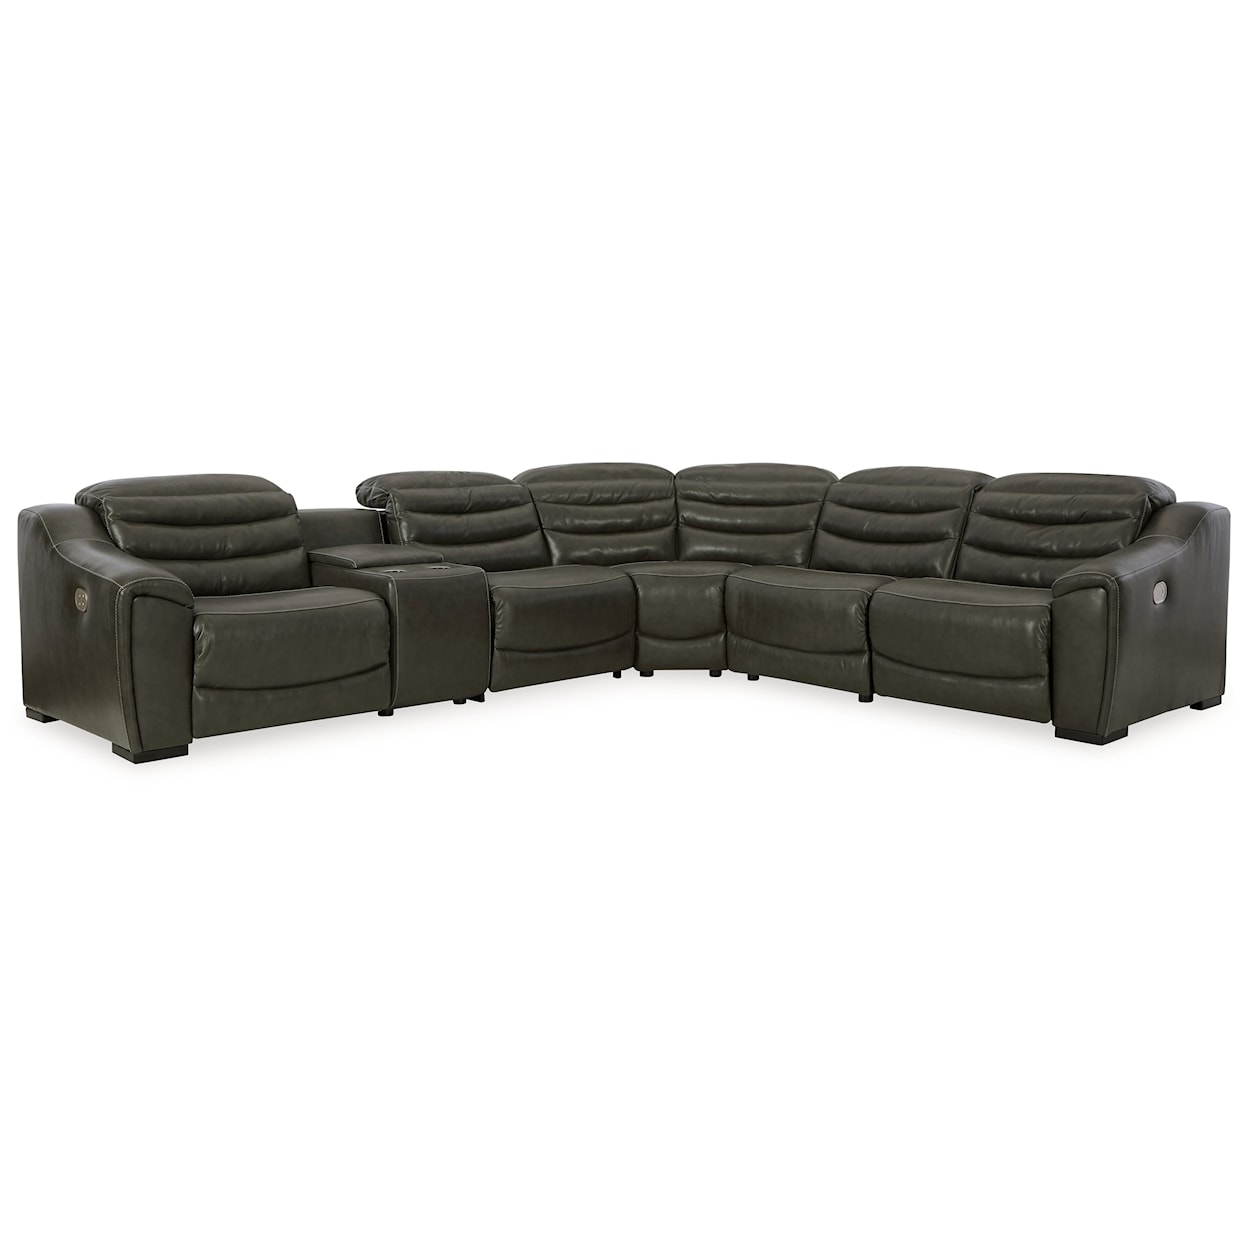 Benchcraft Center Line Reclining Sectional